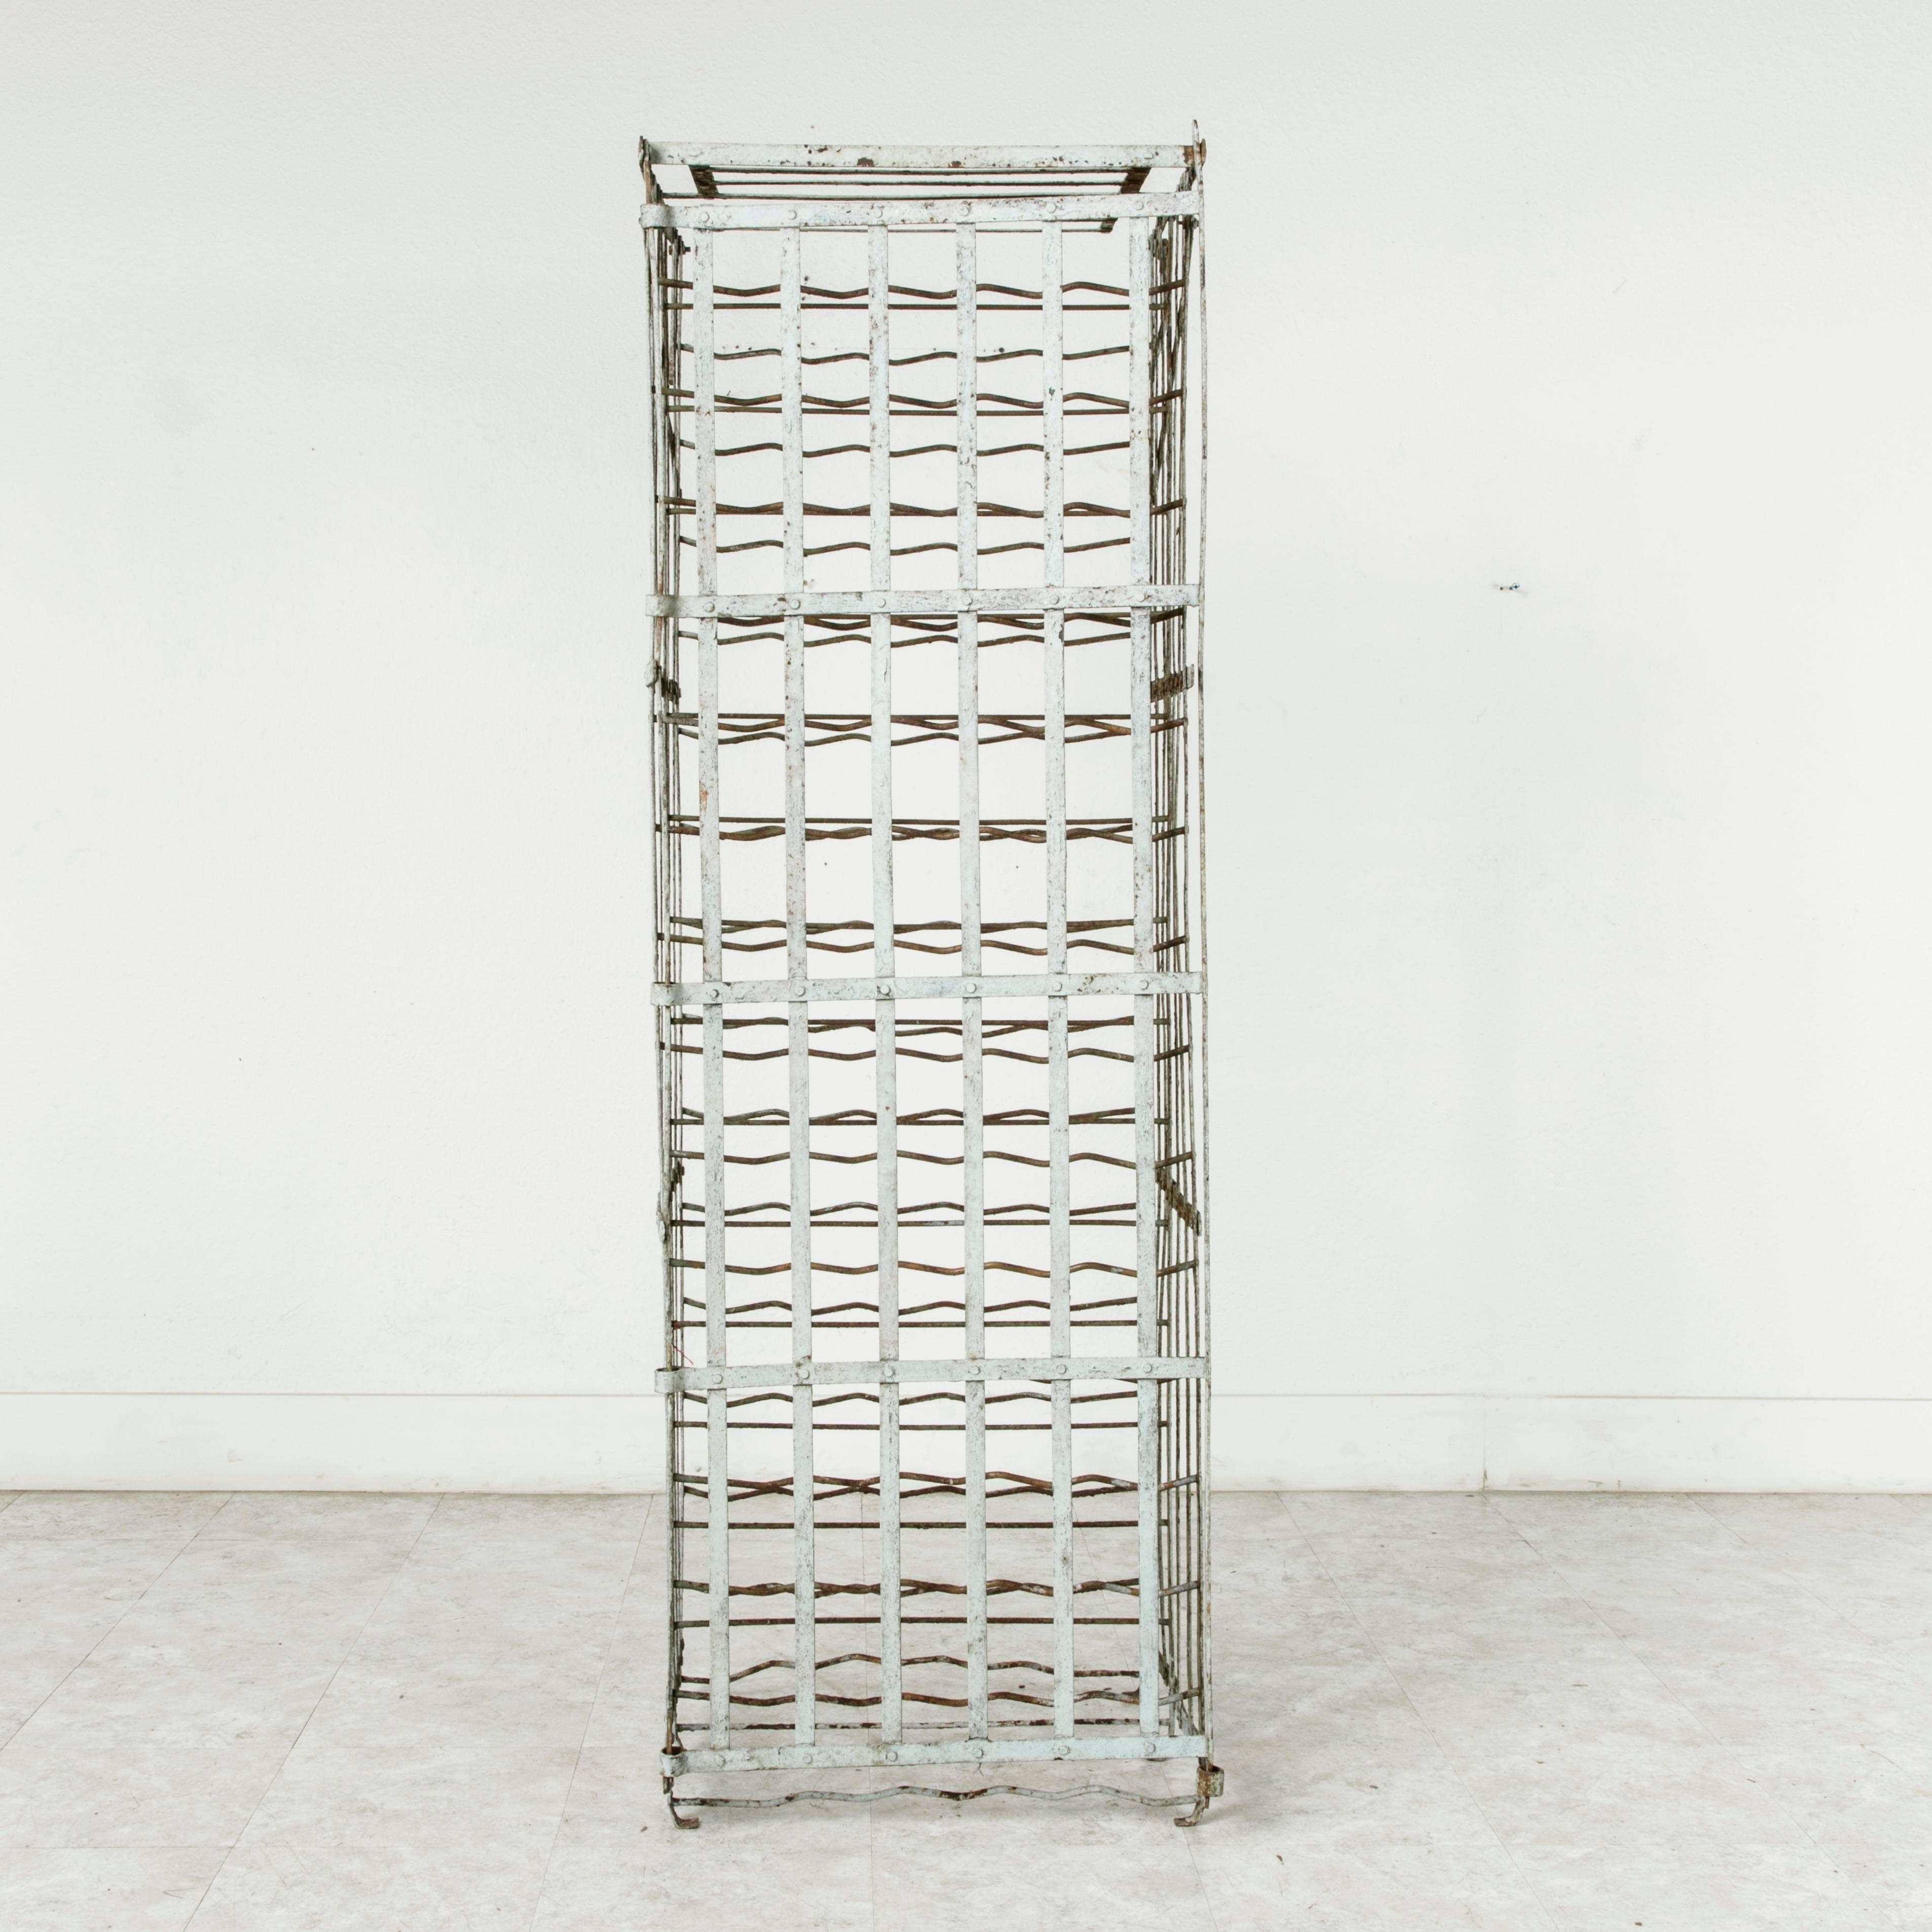 Manufactured during the 1920s, this riveted iron wine cage or wine rack was originally attached to the wall in a French wine cellar though it may also remain freestanding. Painted in a pale blue green, this piece has a capacity of 140 bottles, may